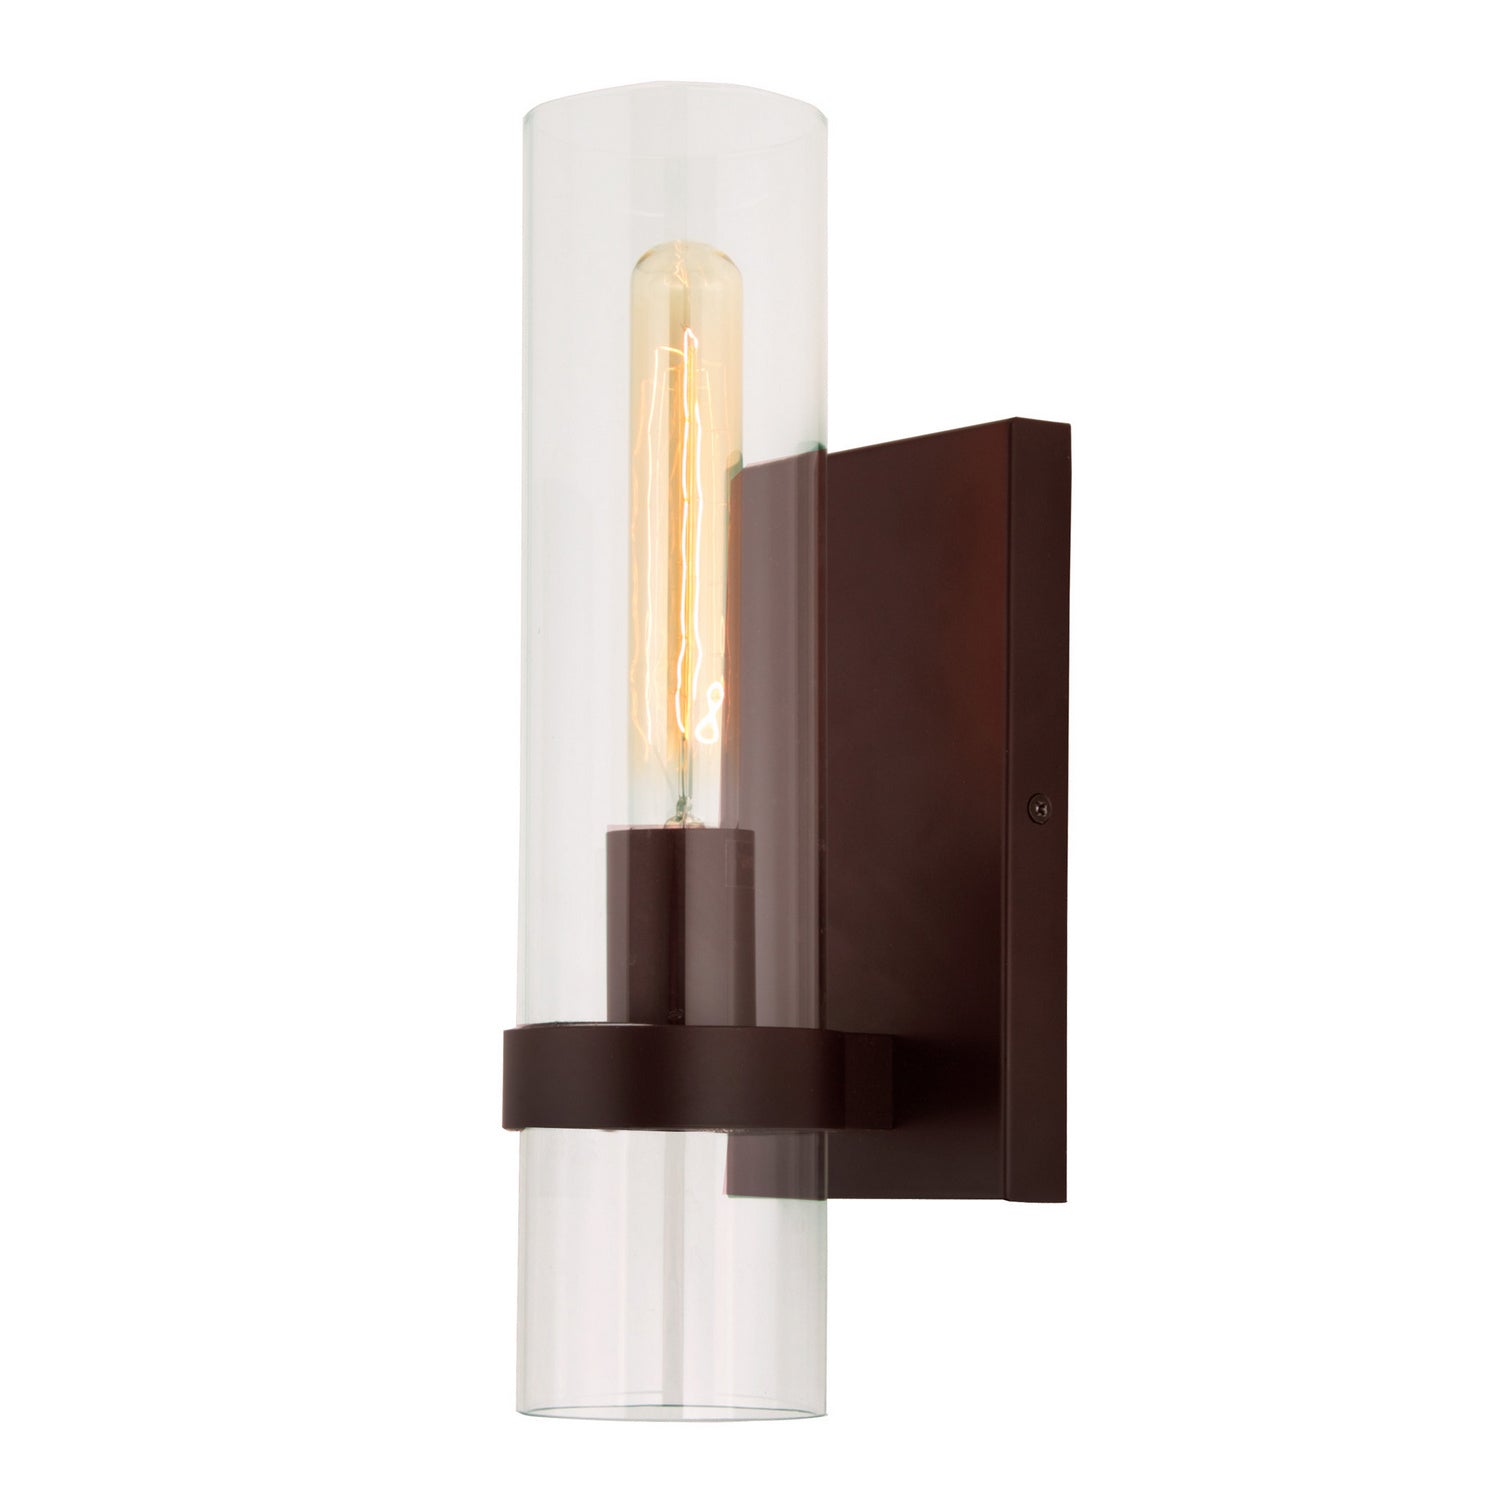 JVI Designs - 455-08 - One Light Wall Sconce - Highland - Oil Rubbed Bronze